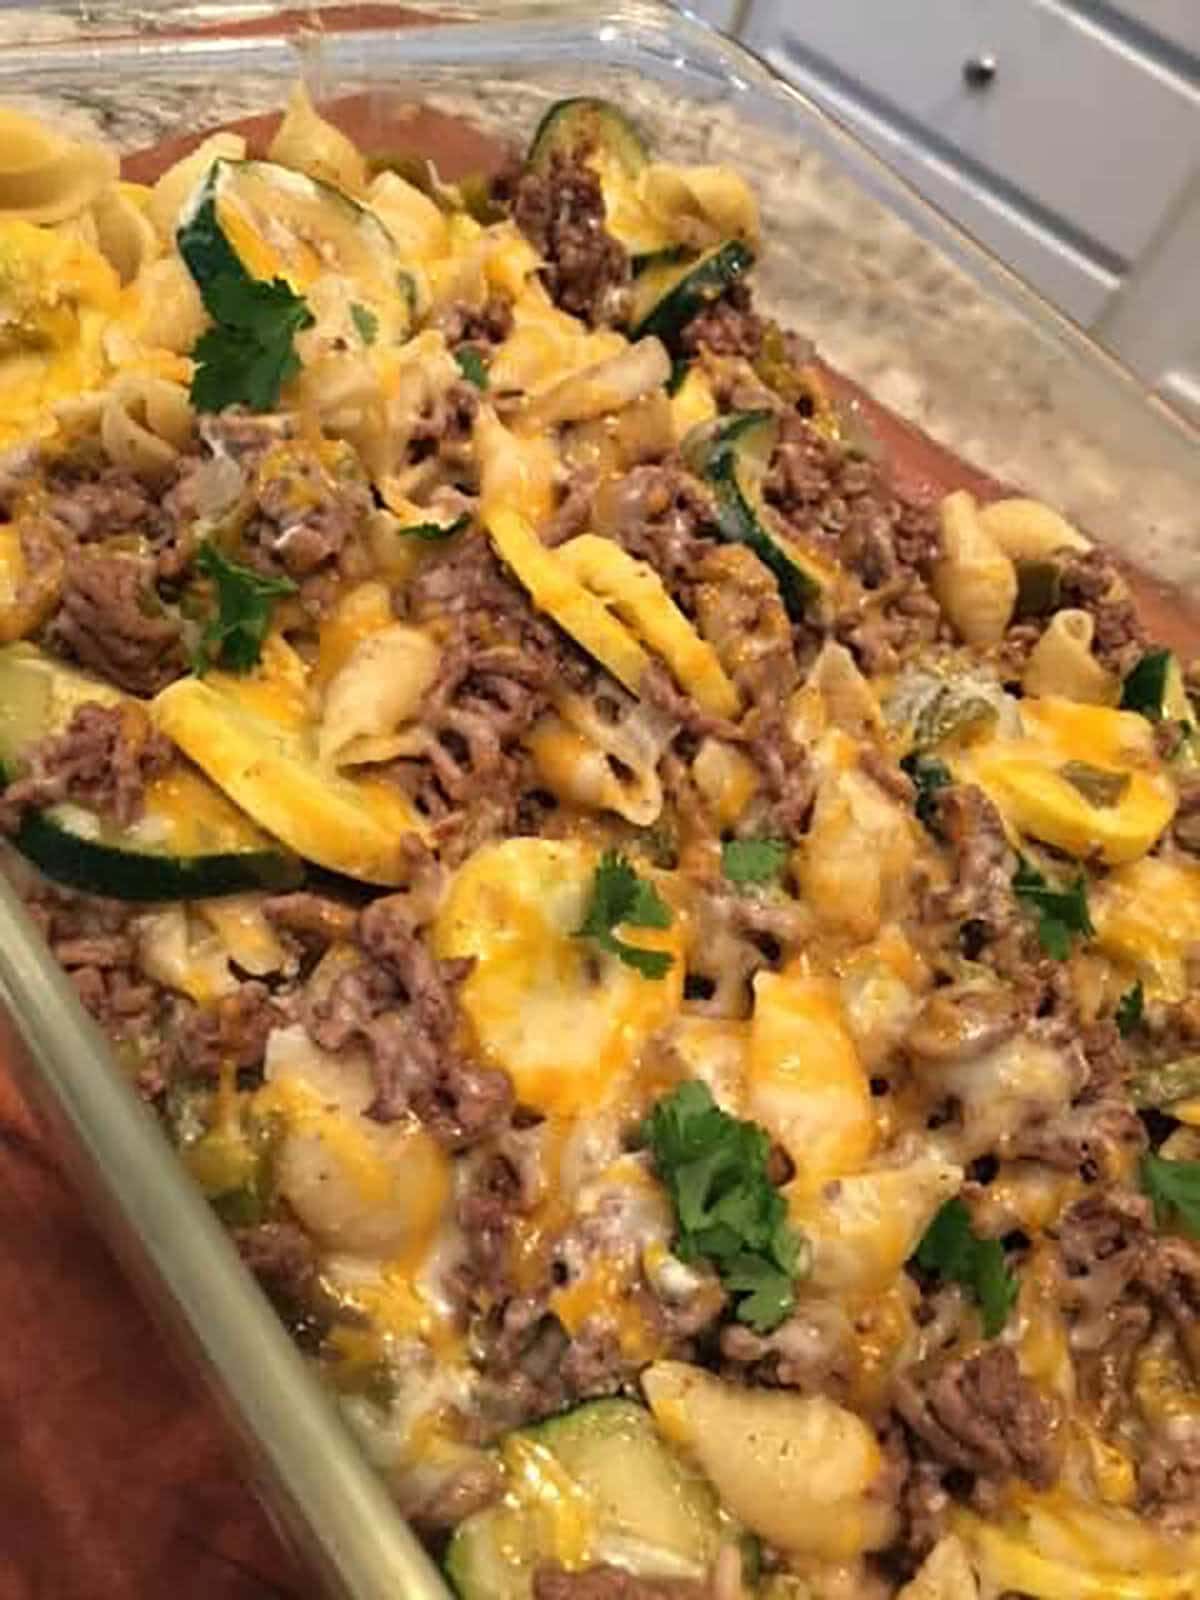 Baked zucchini casserole topped with melted cheese in baking dish.